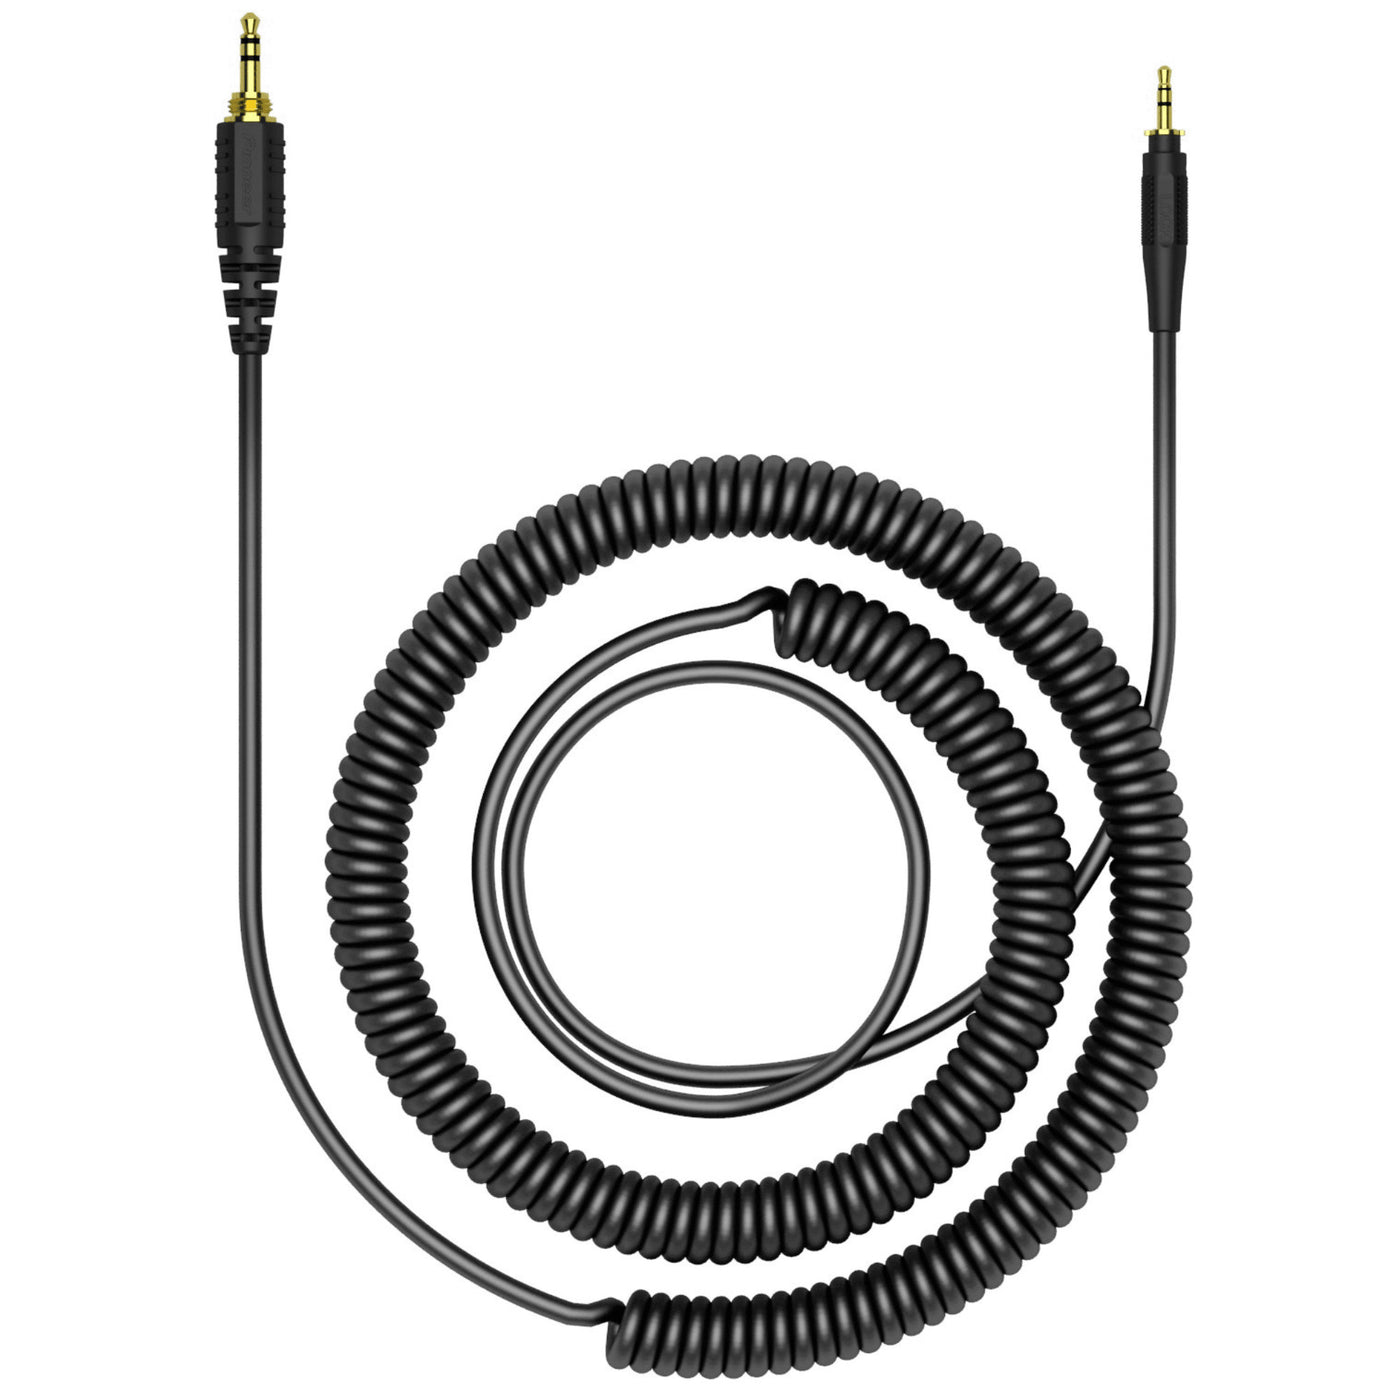 Pioneer DJ HC-CA0401 Coiled Extension Cable, 47.24-inch, for HRM-7/6/5 Studio Wired Headphones for Professional Audio, Aux Cable Cord for DJ Equipment and Recording